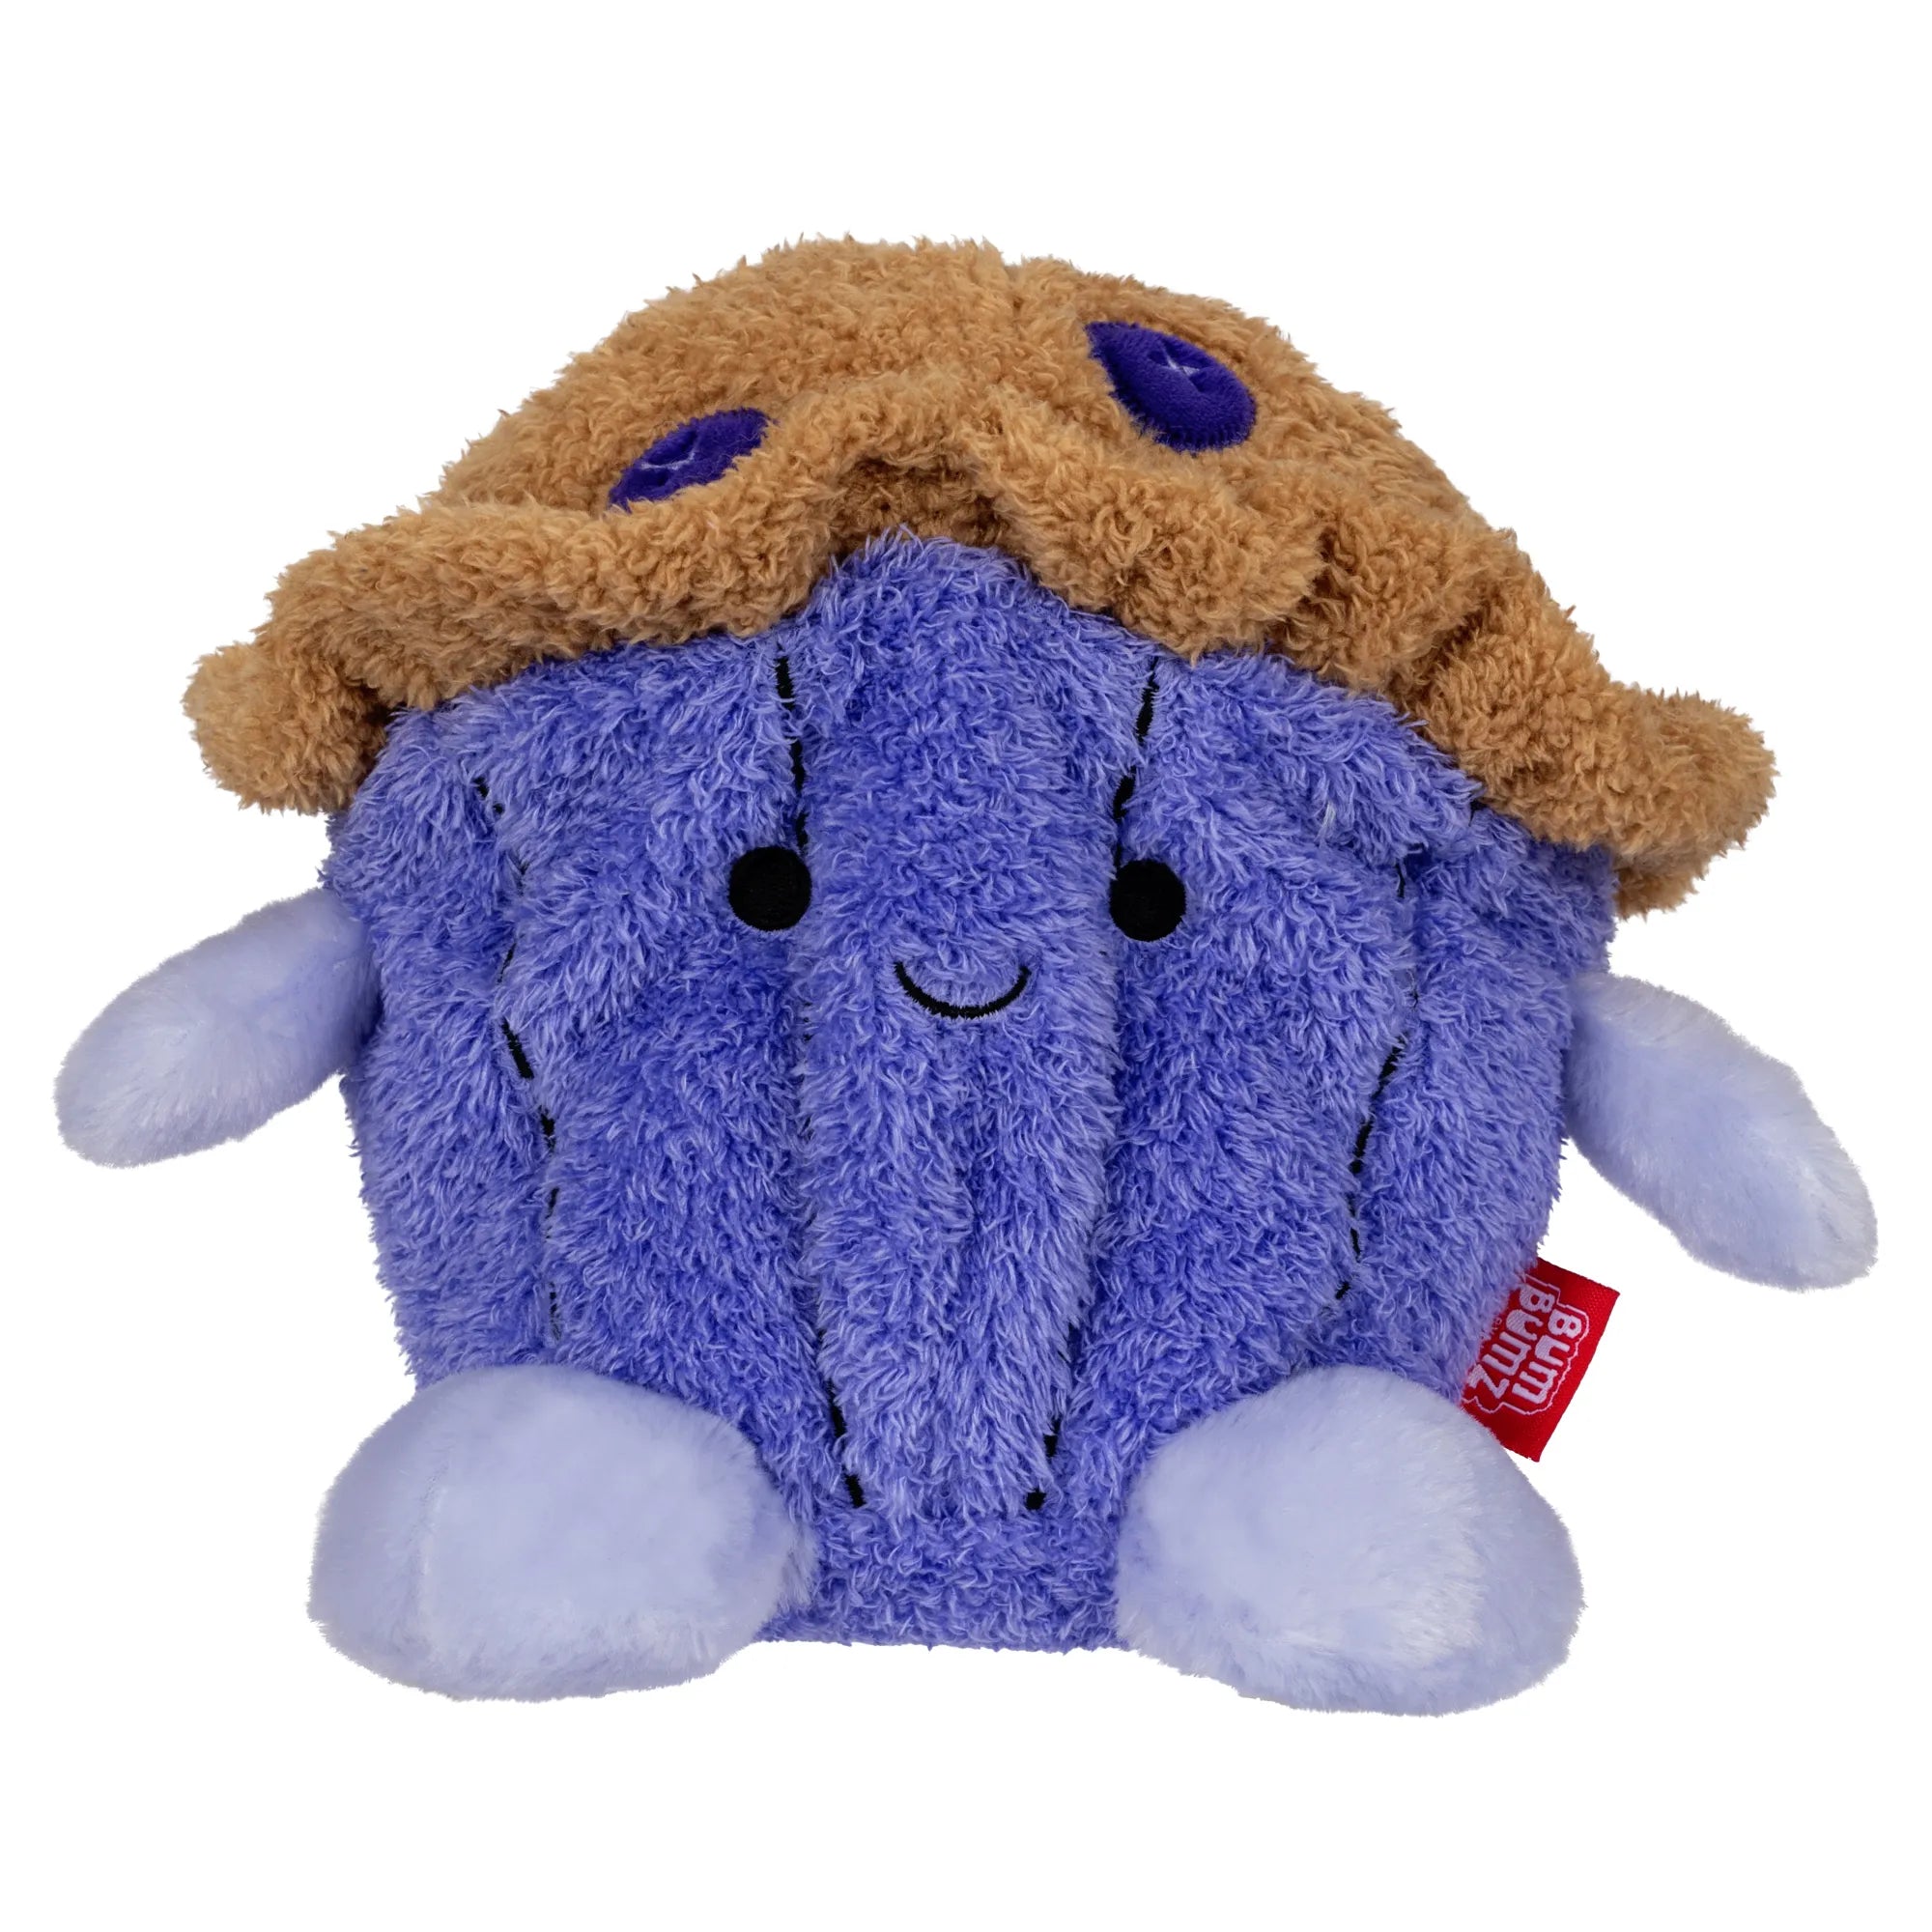 BumBumz Breakfast Series - 7.5” Collectibles - Blueberry Muffin 'Melissa' - Ages 3-Adult - Brown's Hobby & Game